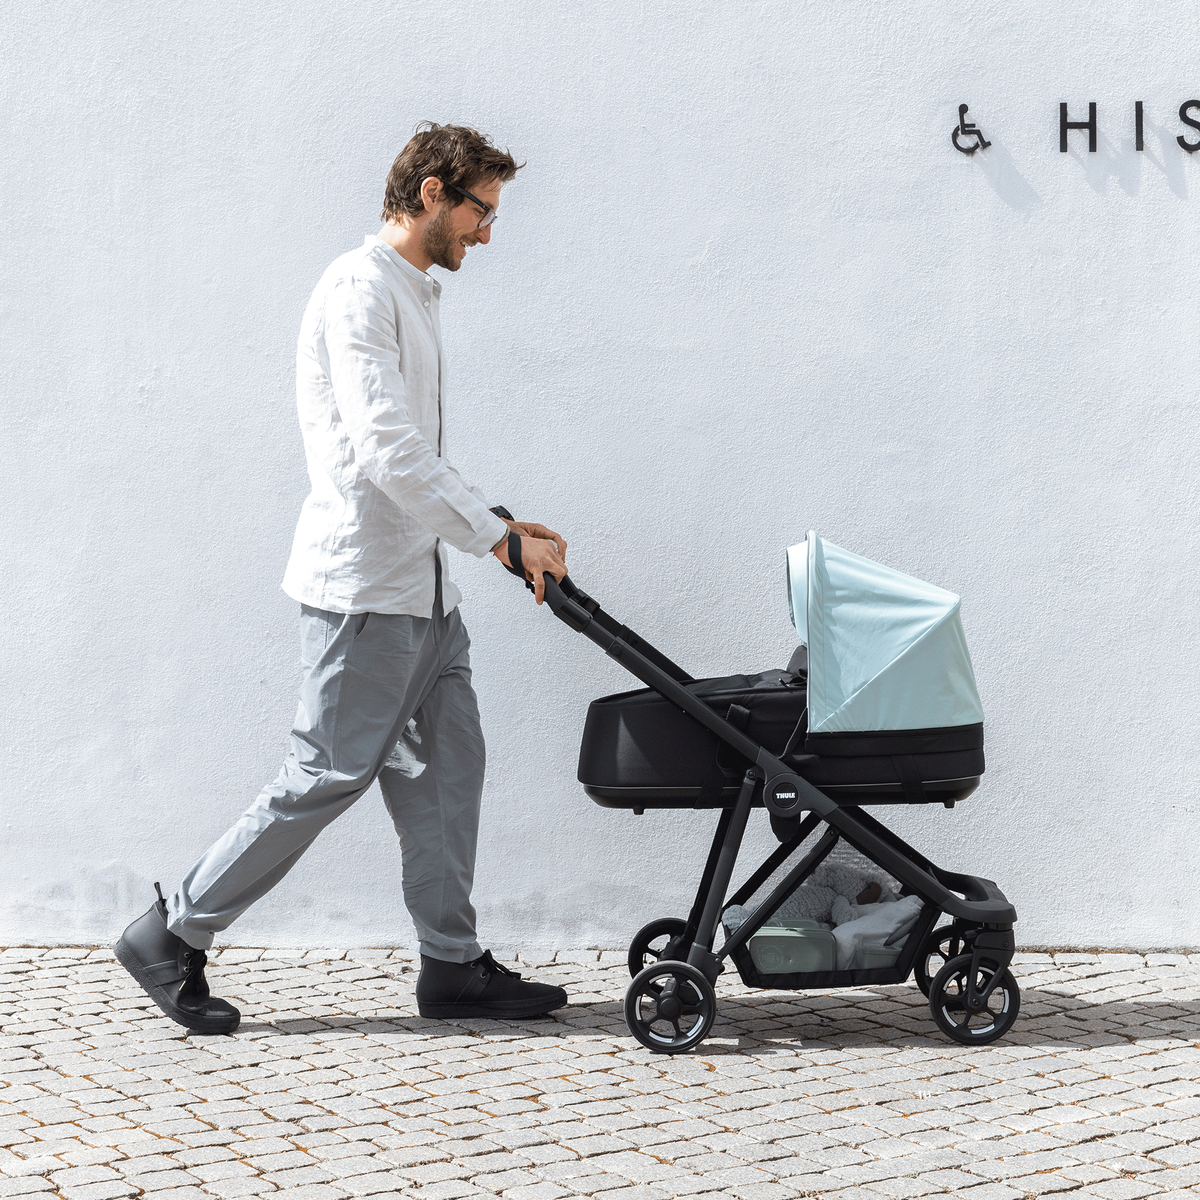 Next to a concrete wall with text, a man walks with his baby in a blue Thule Shine baby stroller.